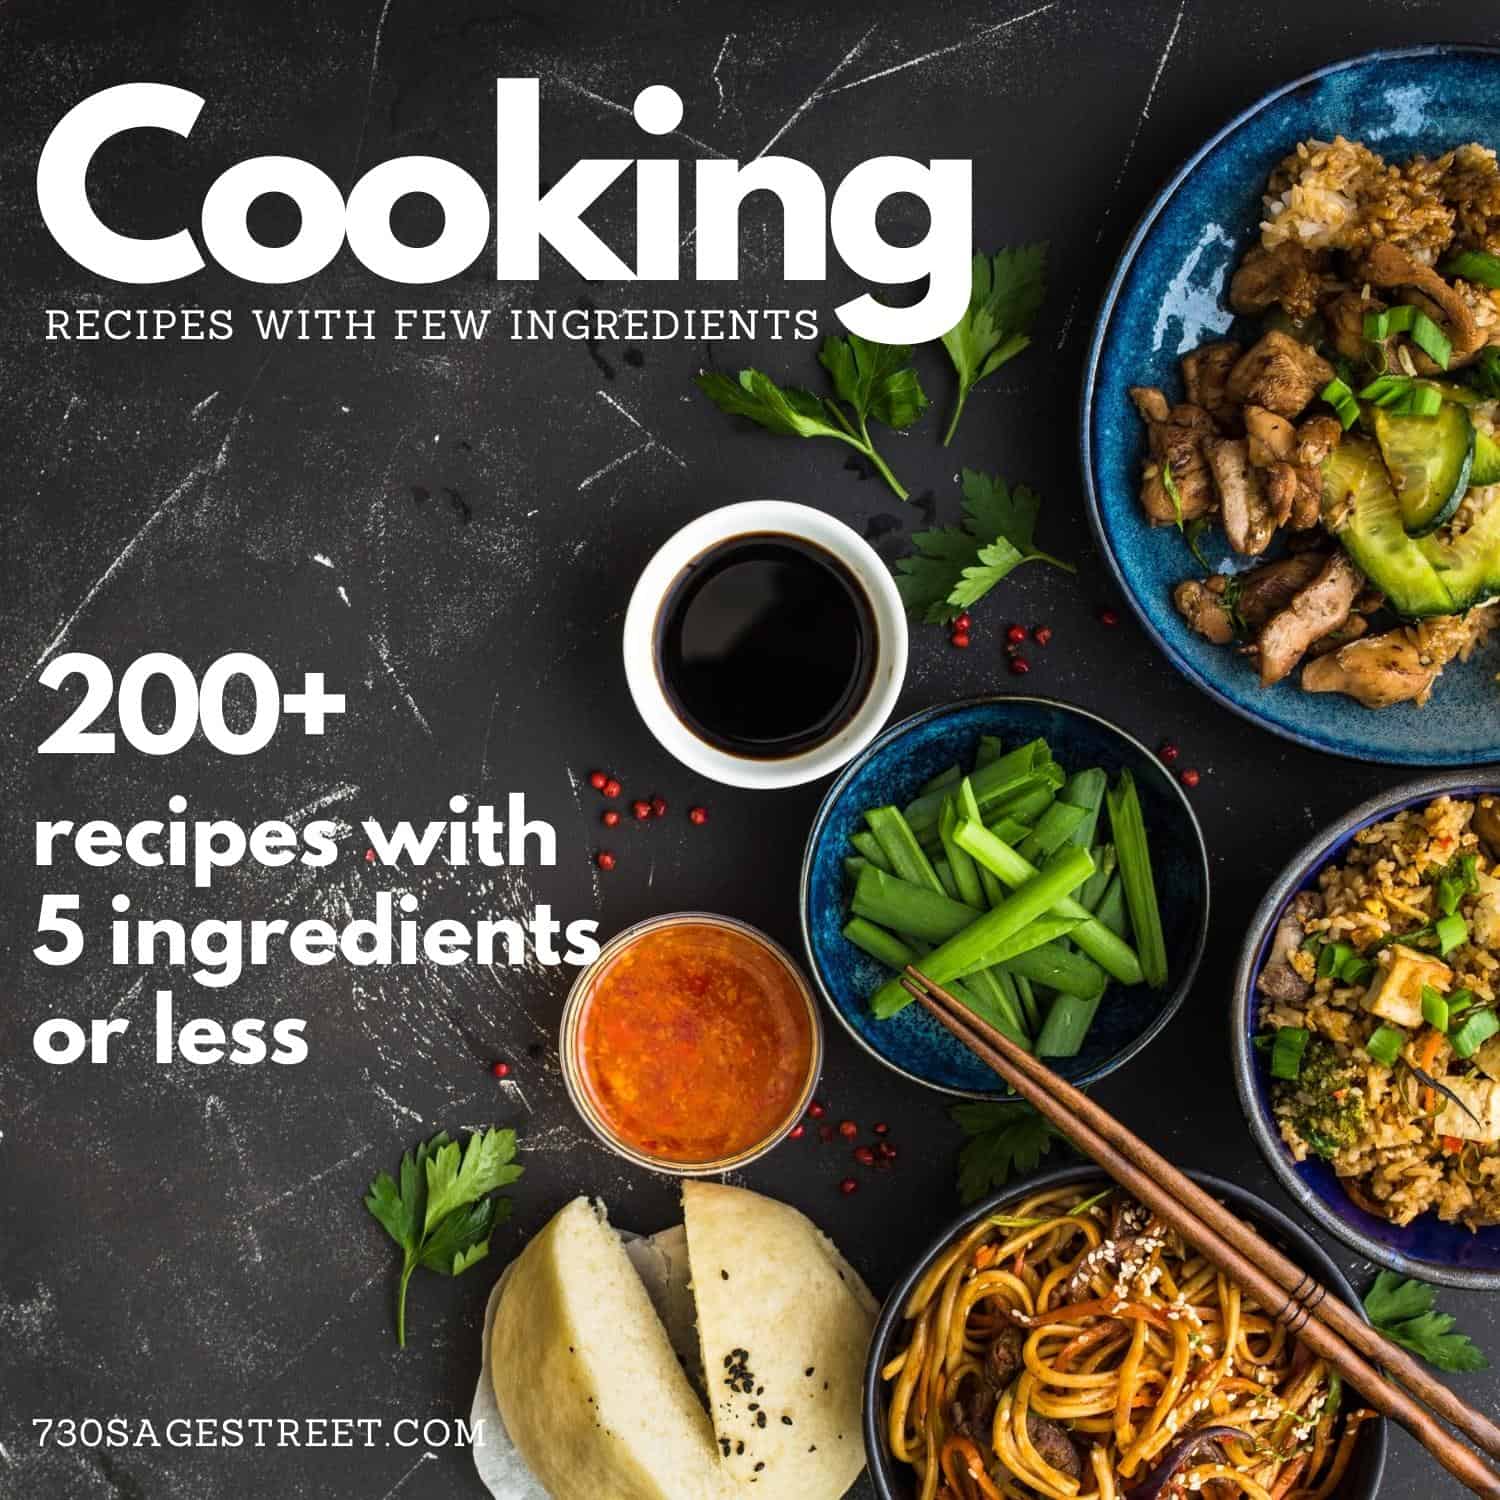 Cooking recipes with few ingredients